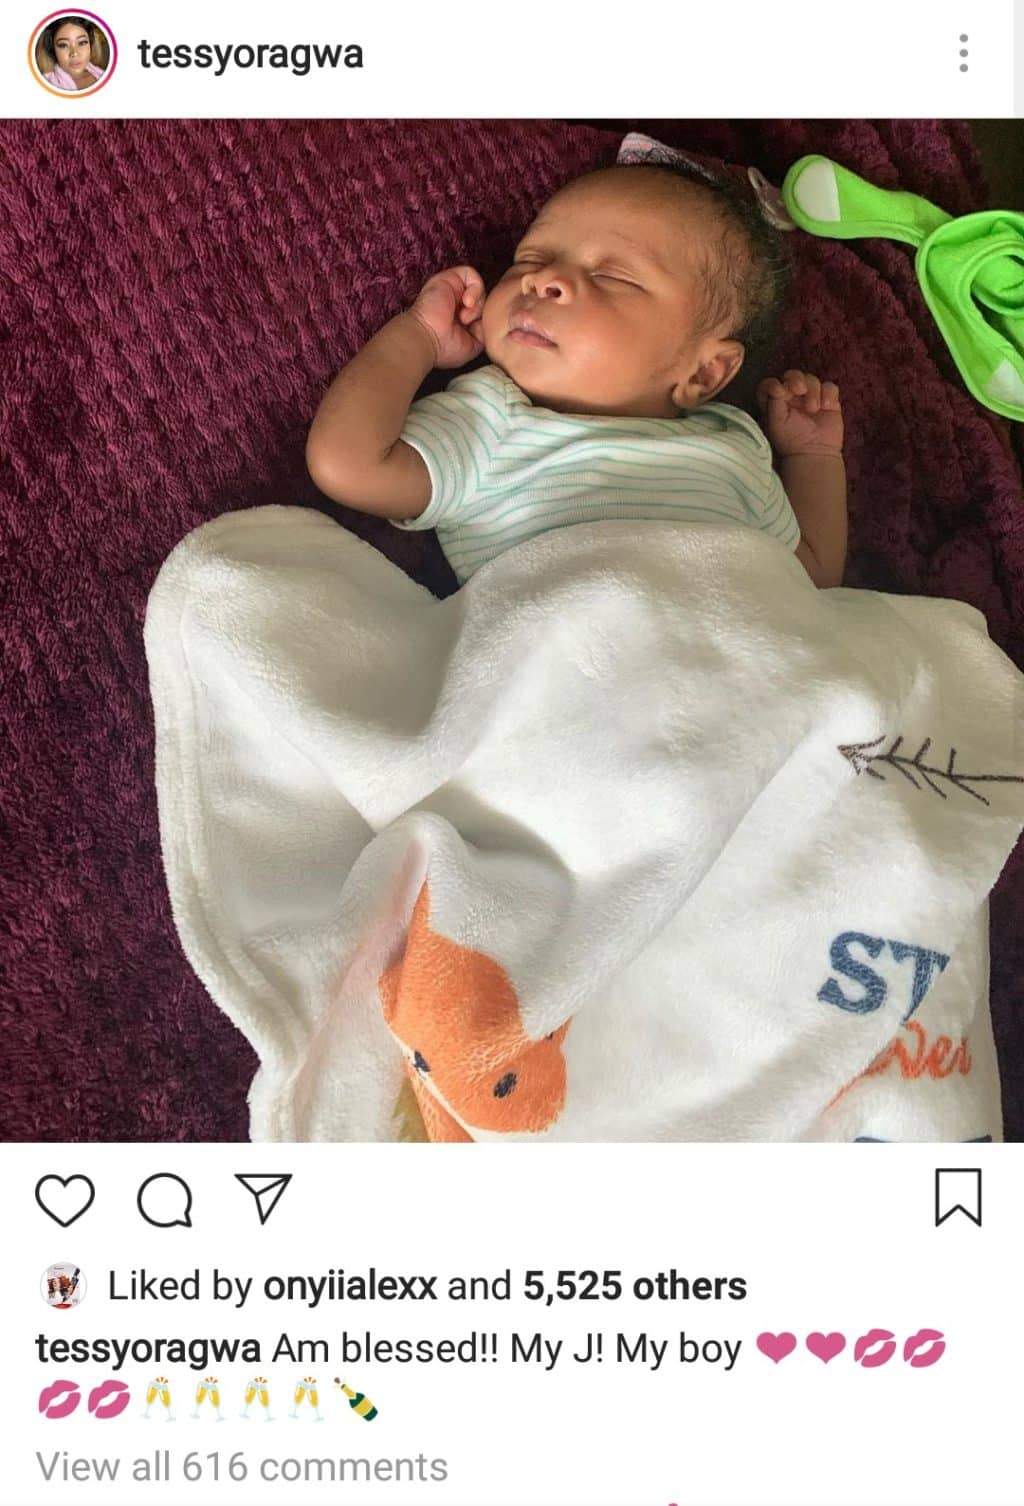 Tessy Oragwa celebrates the birth of her son with lovely photos